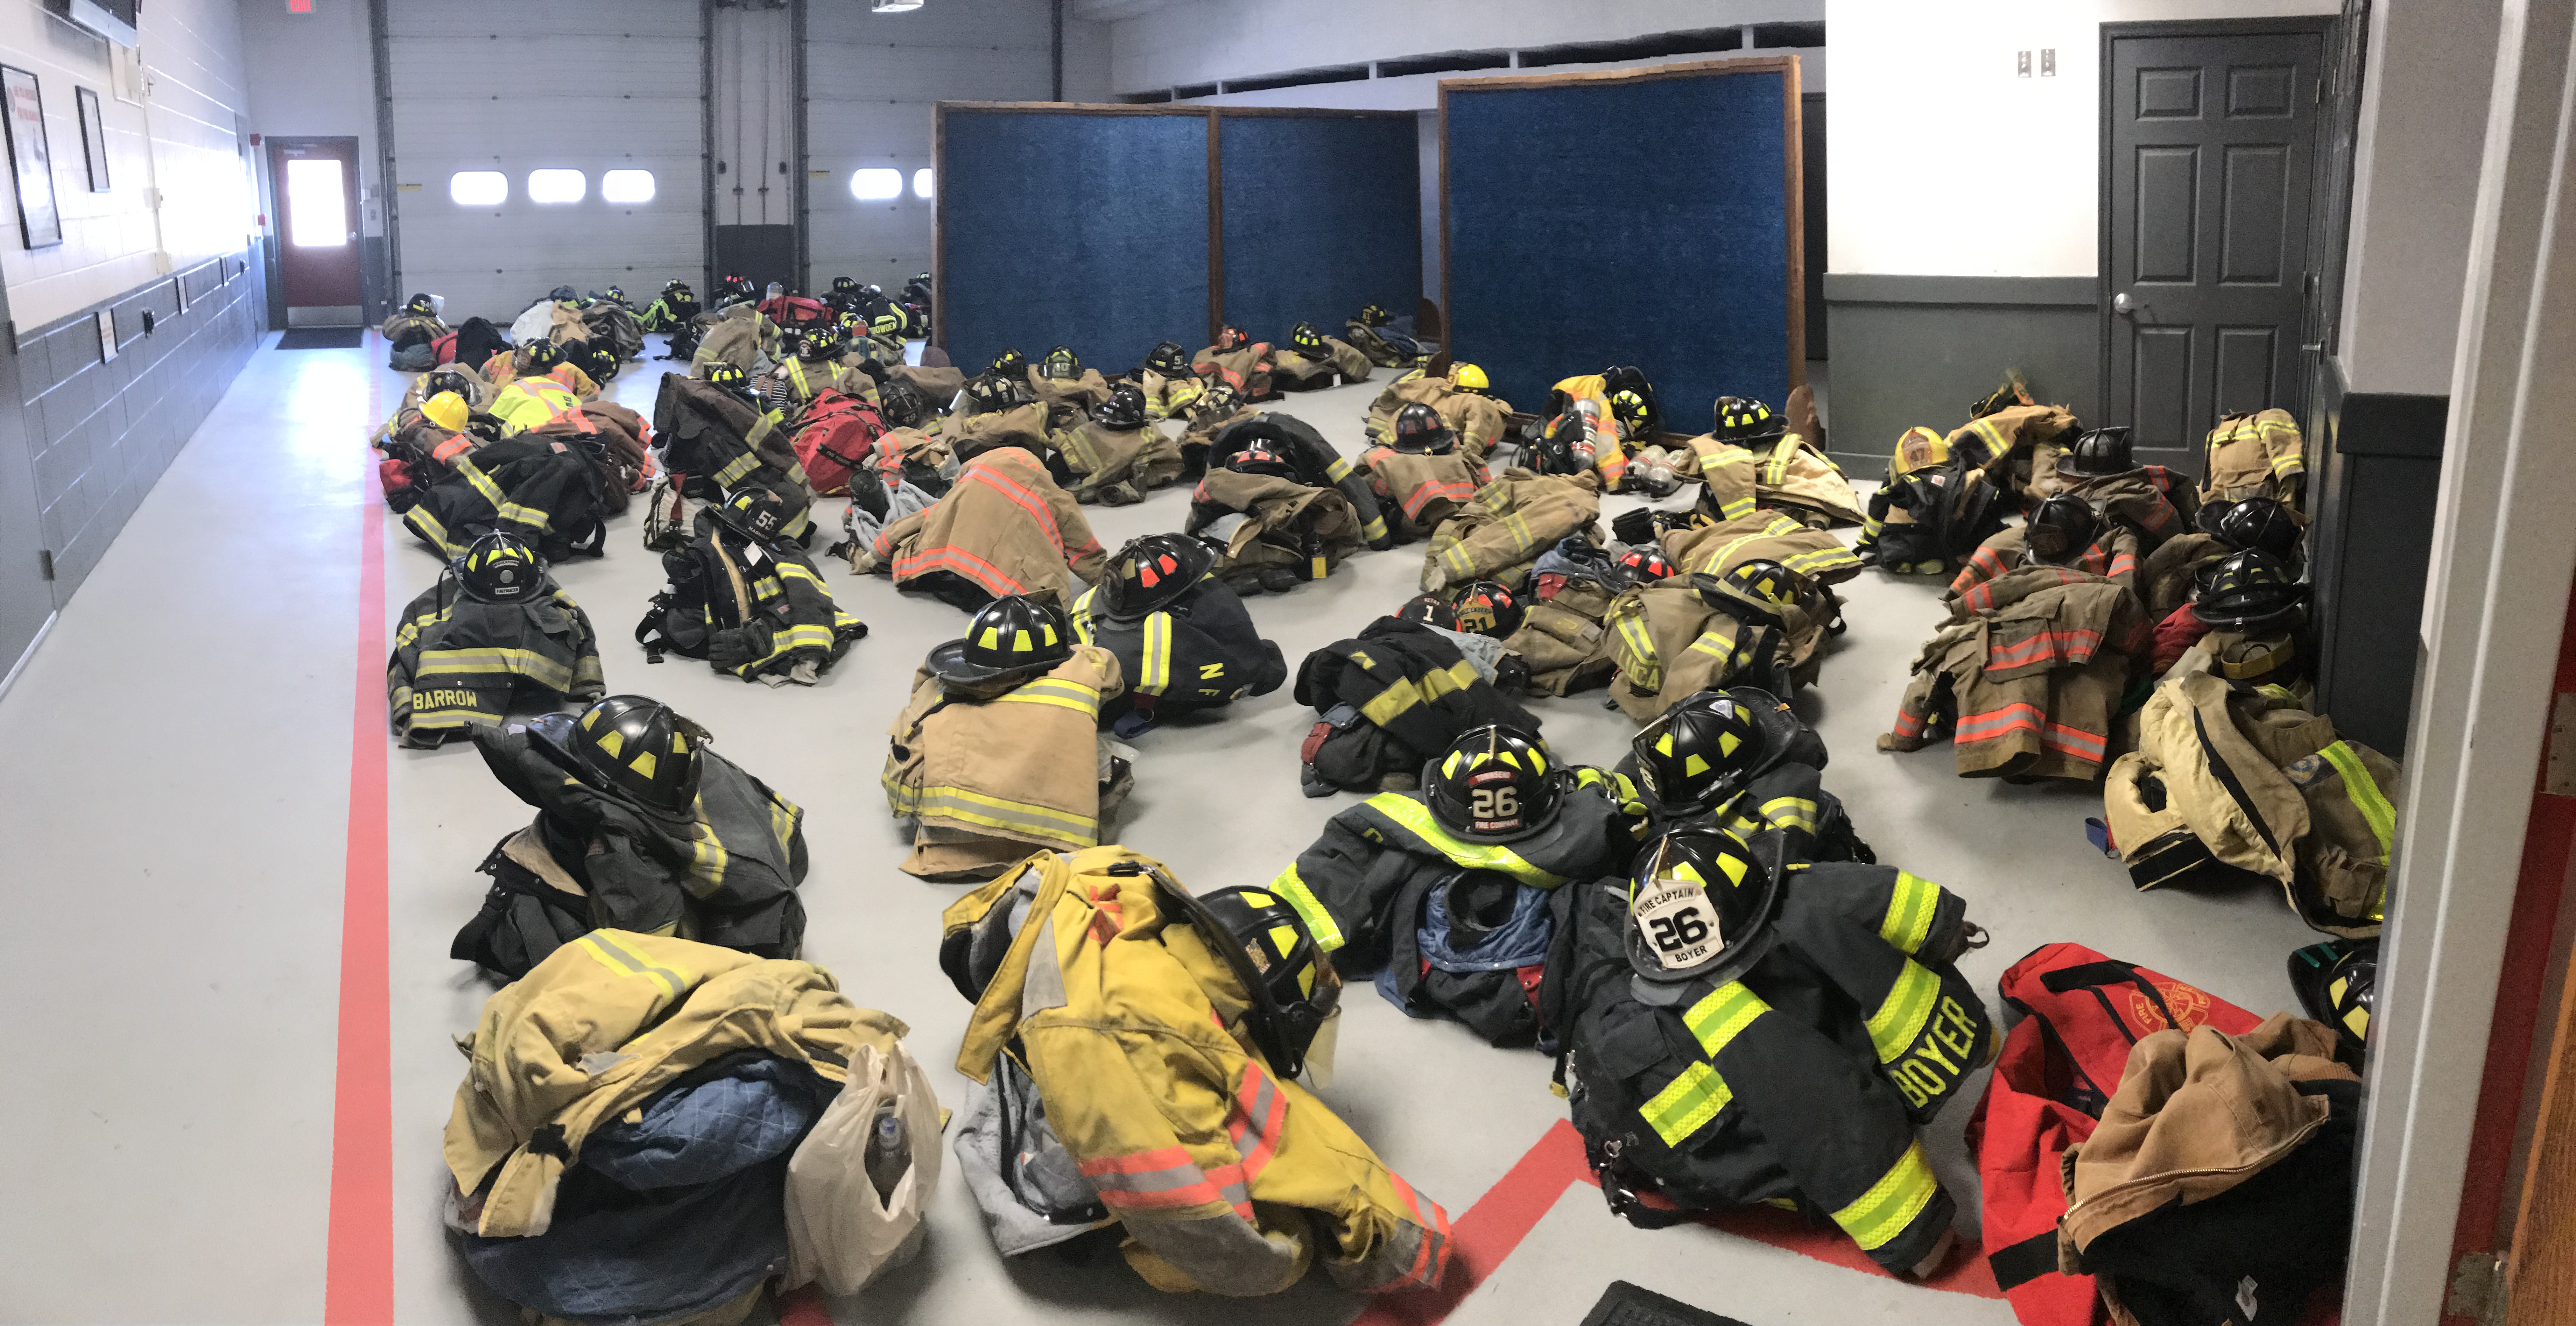 Photo of firefighters uniforms from different fire companies spread-out across the floor with helmets inside a building